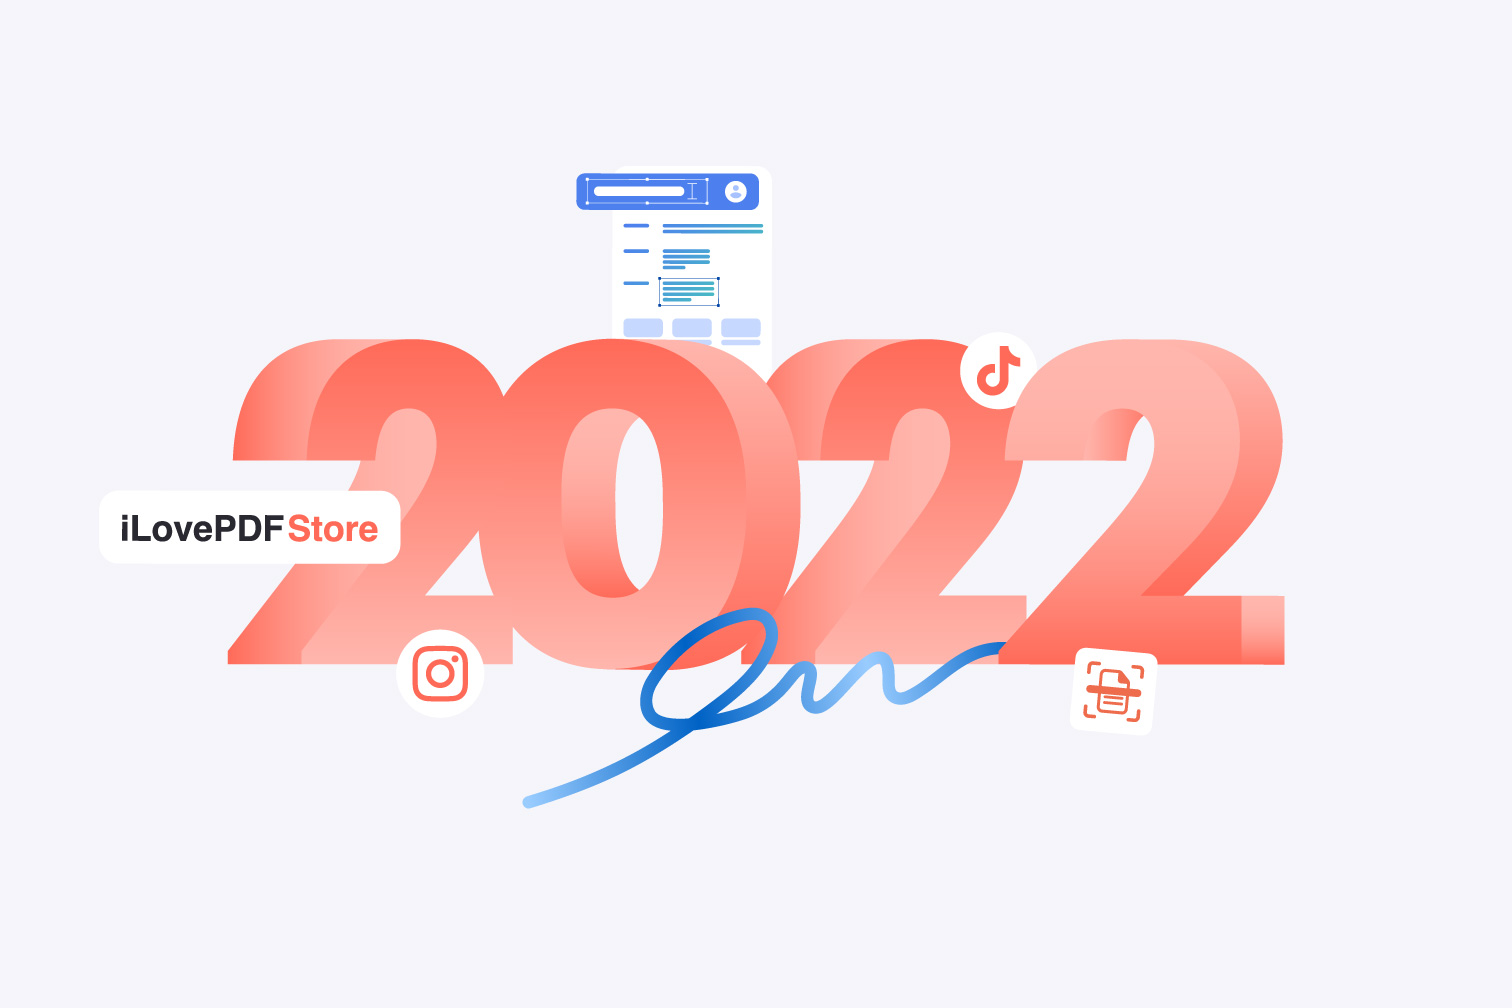 What was new in 2022? New free PDF tools & iLovePDF updates